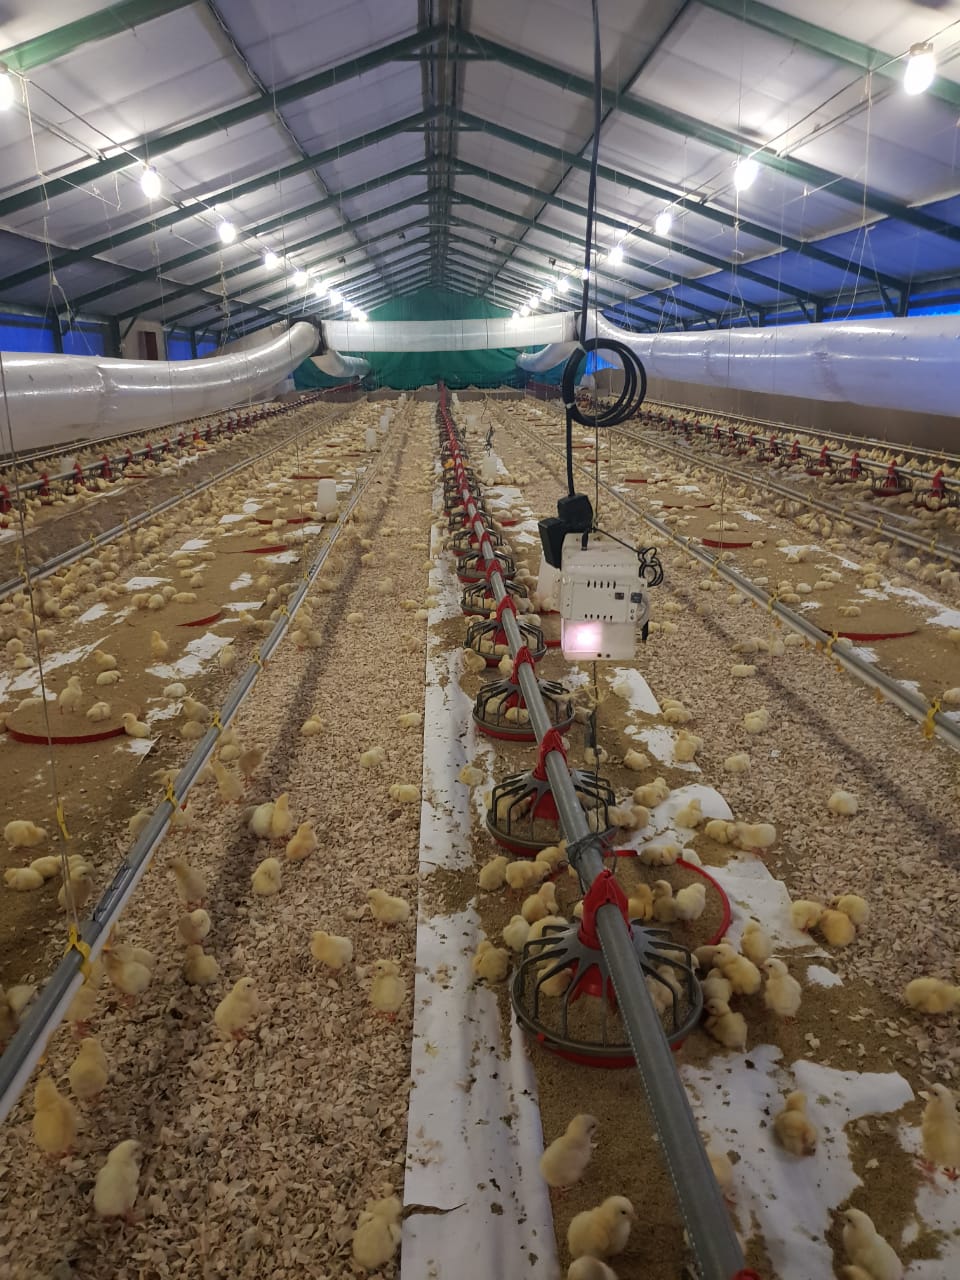 Agriculture - Chickenfarms connected, can we get our profitability up?